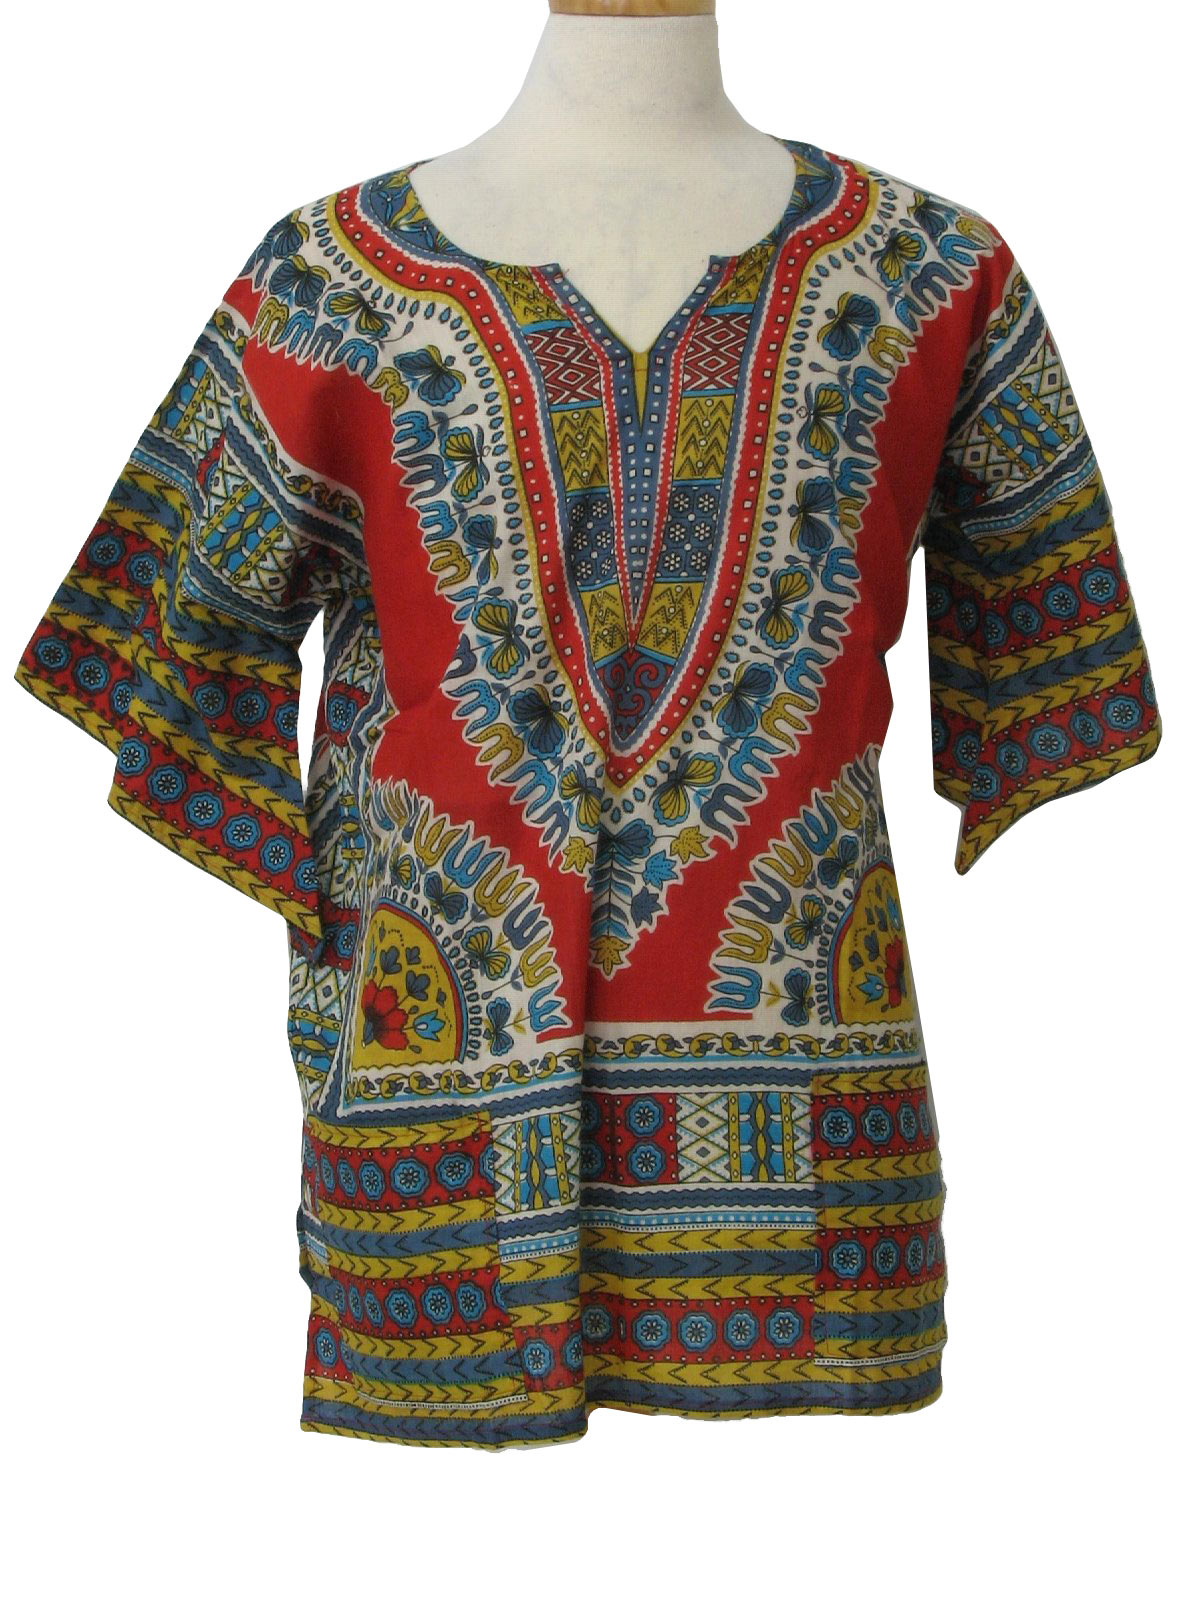 70s Vintage Dashiki Shirt: 70s reproduction (made new recently) -No ...